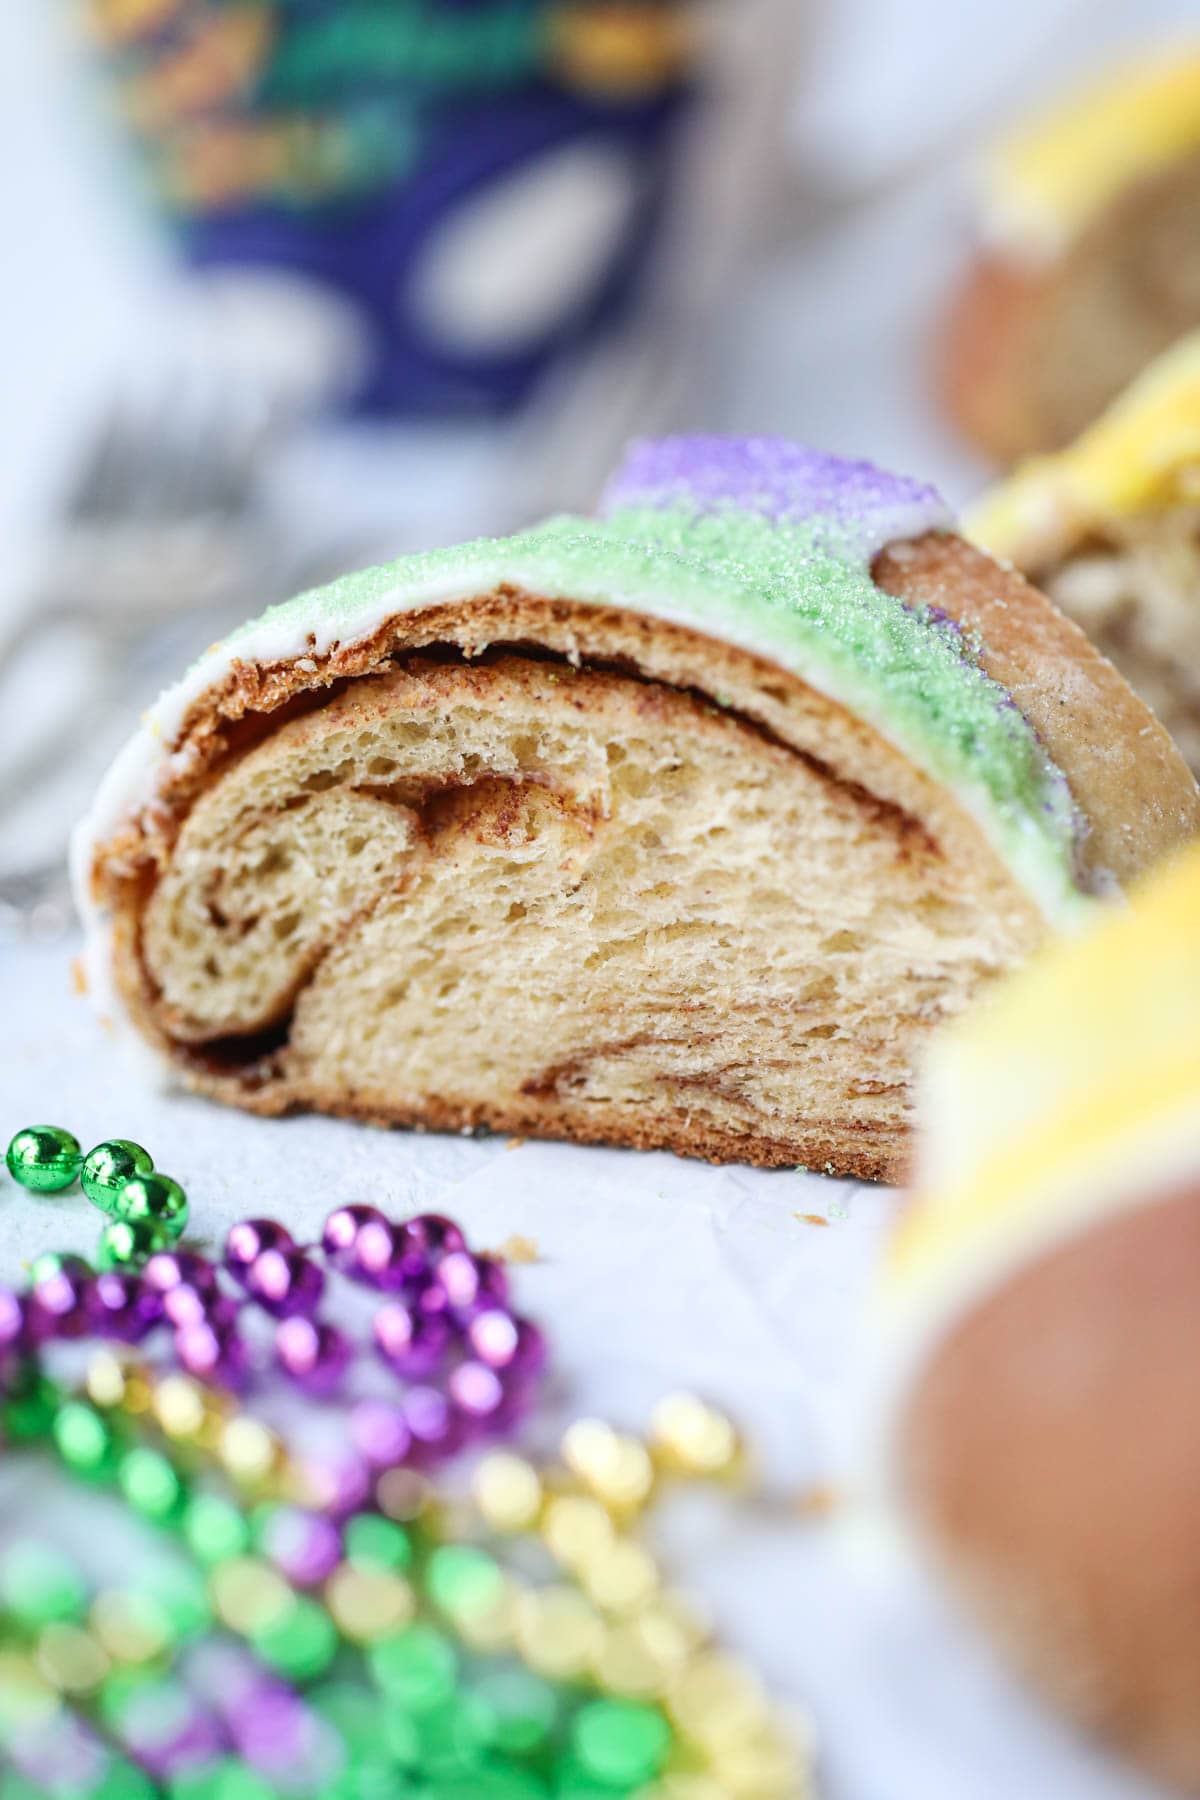 A slice of Mardi Gras king cake on a white surface.